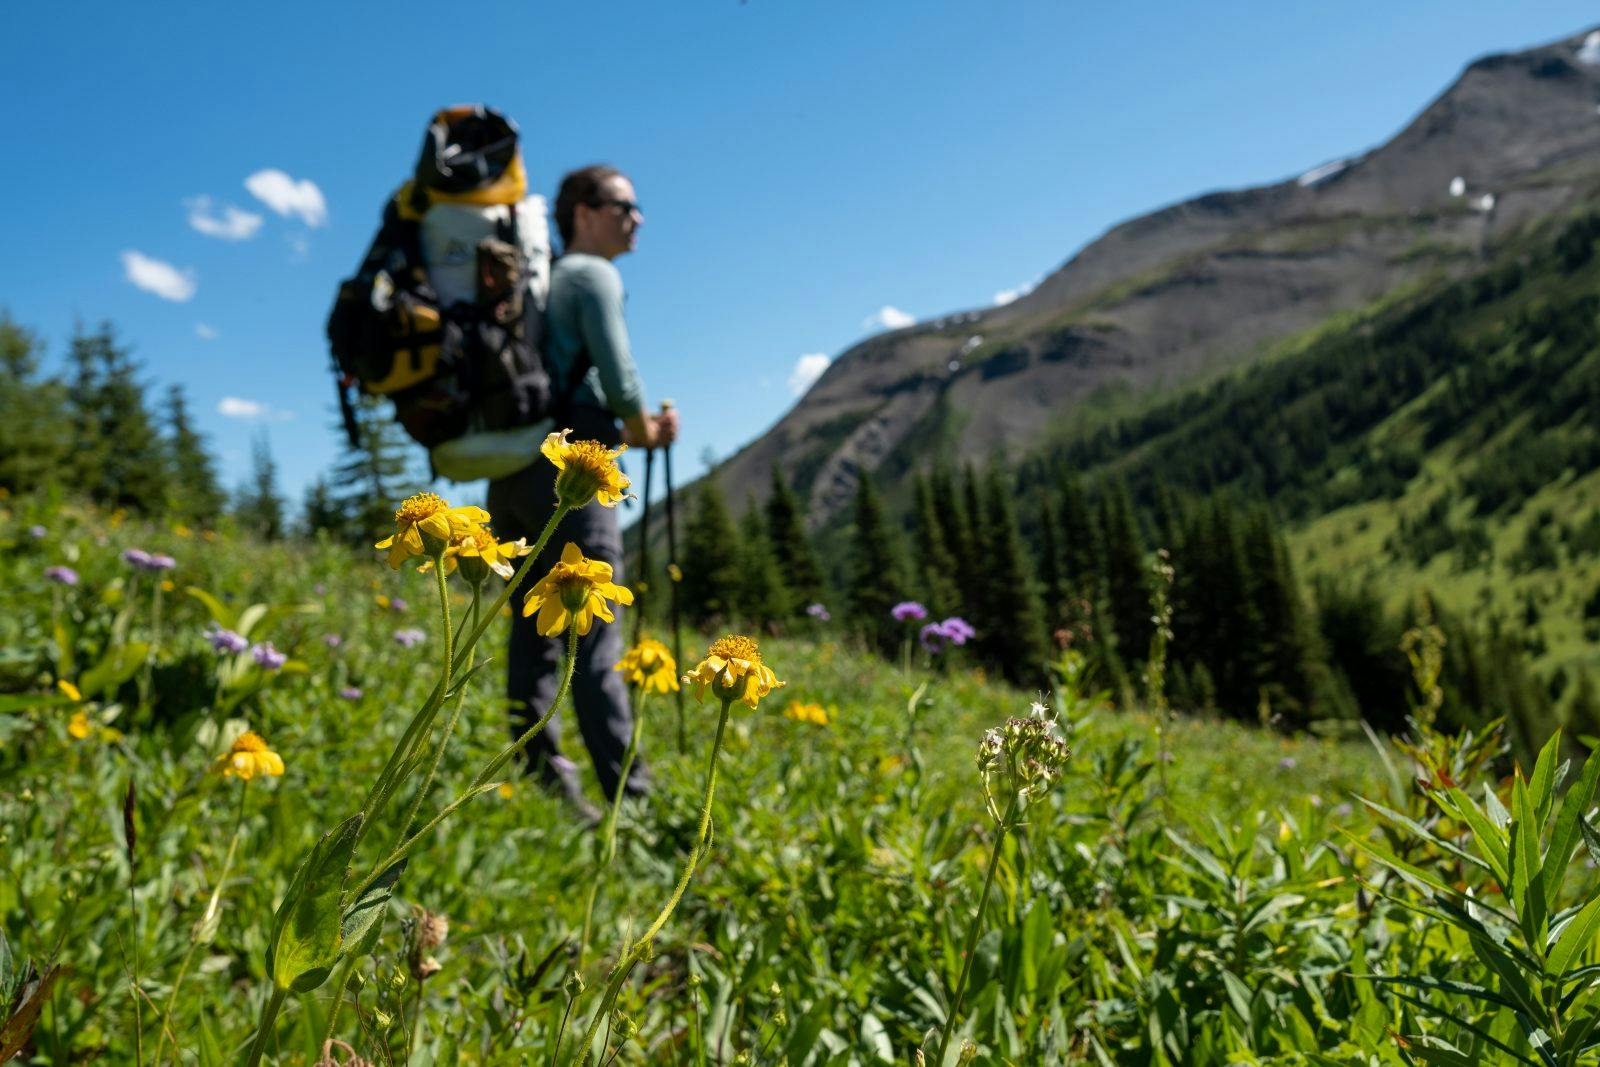 Sub-alpine flowers blooming just before Snake Indian Pass. Photo by Coburn Brown